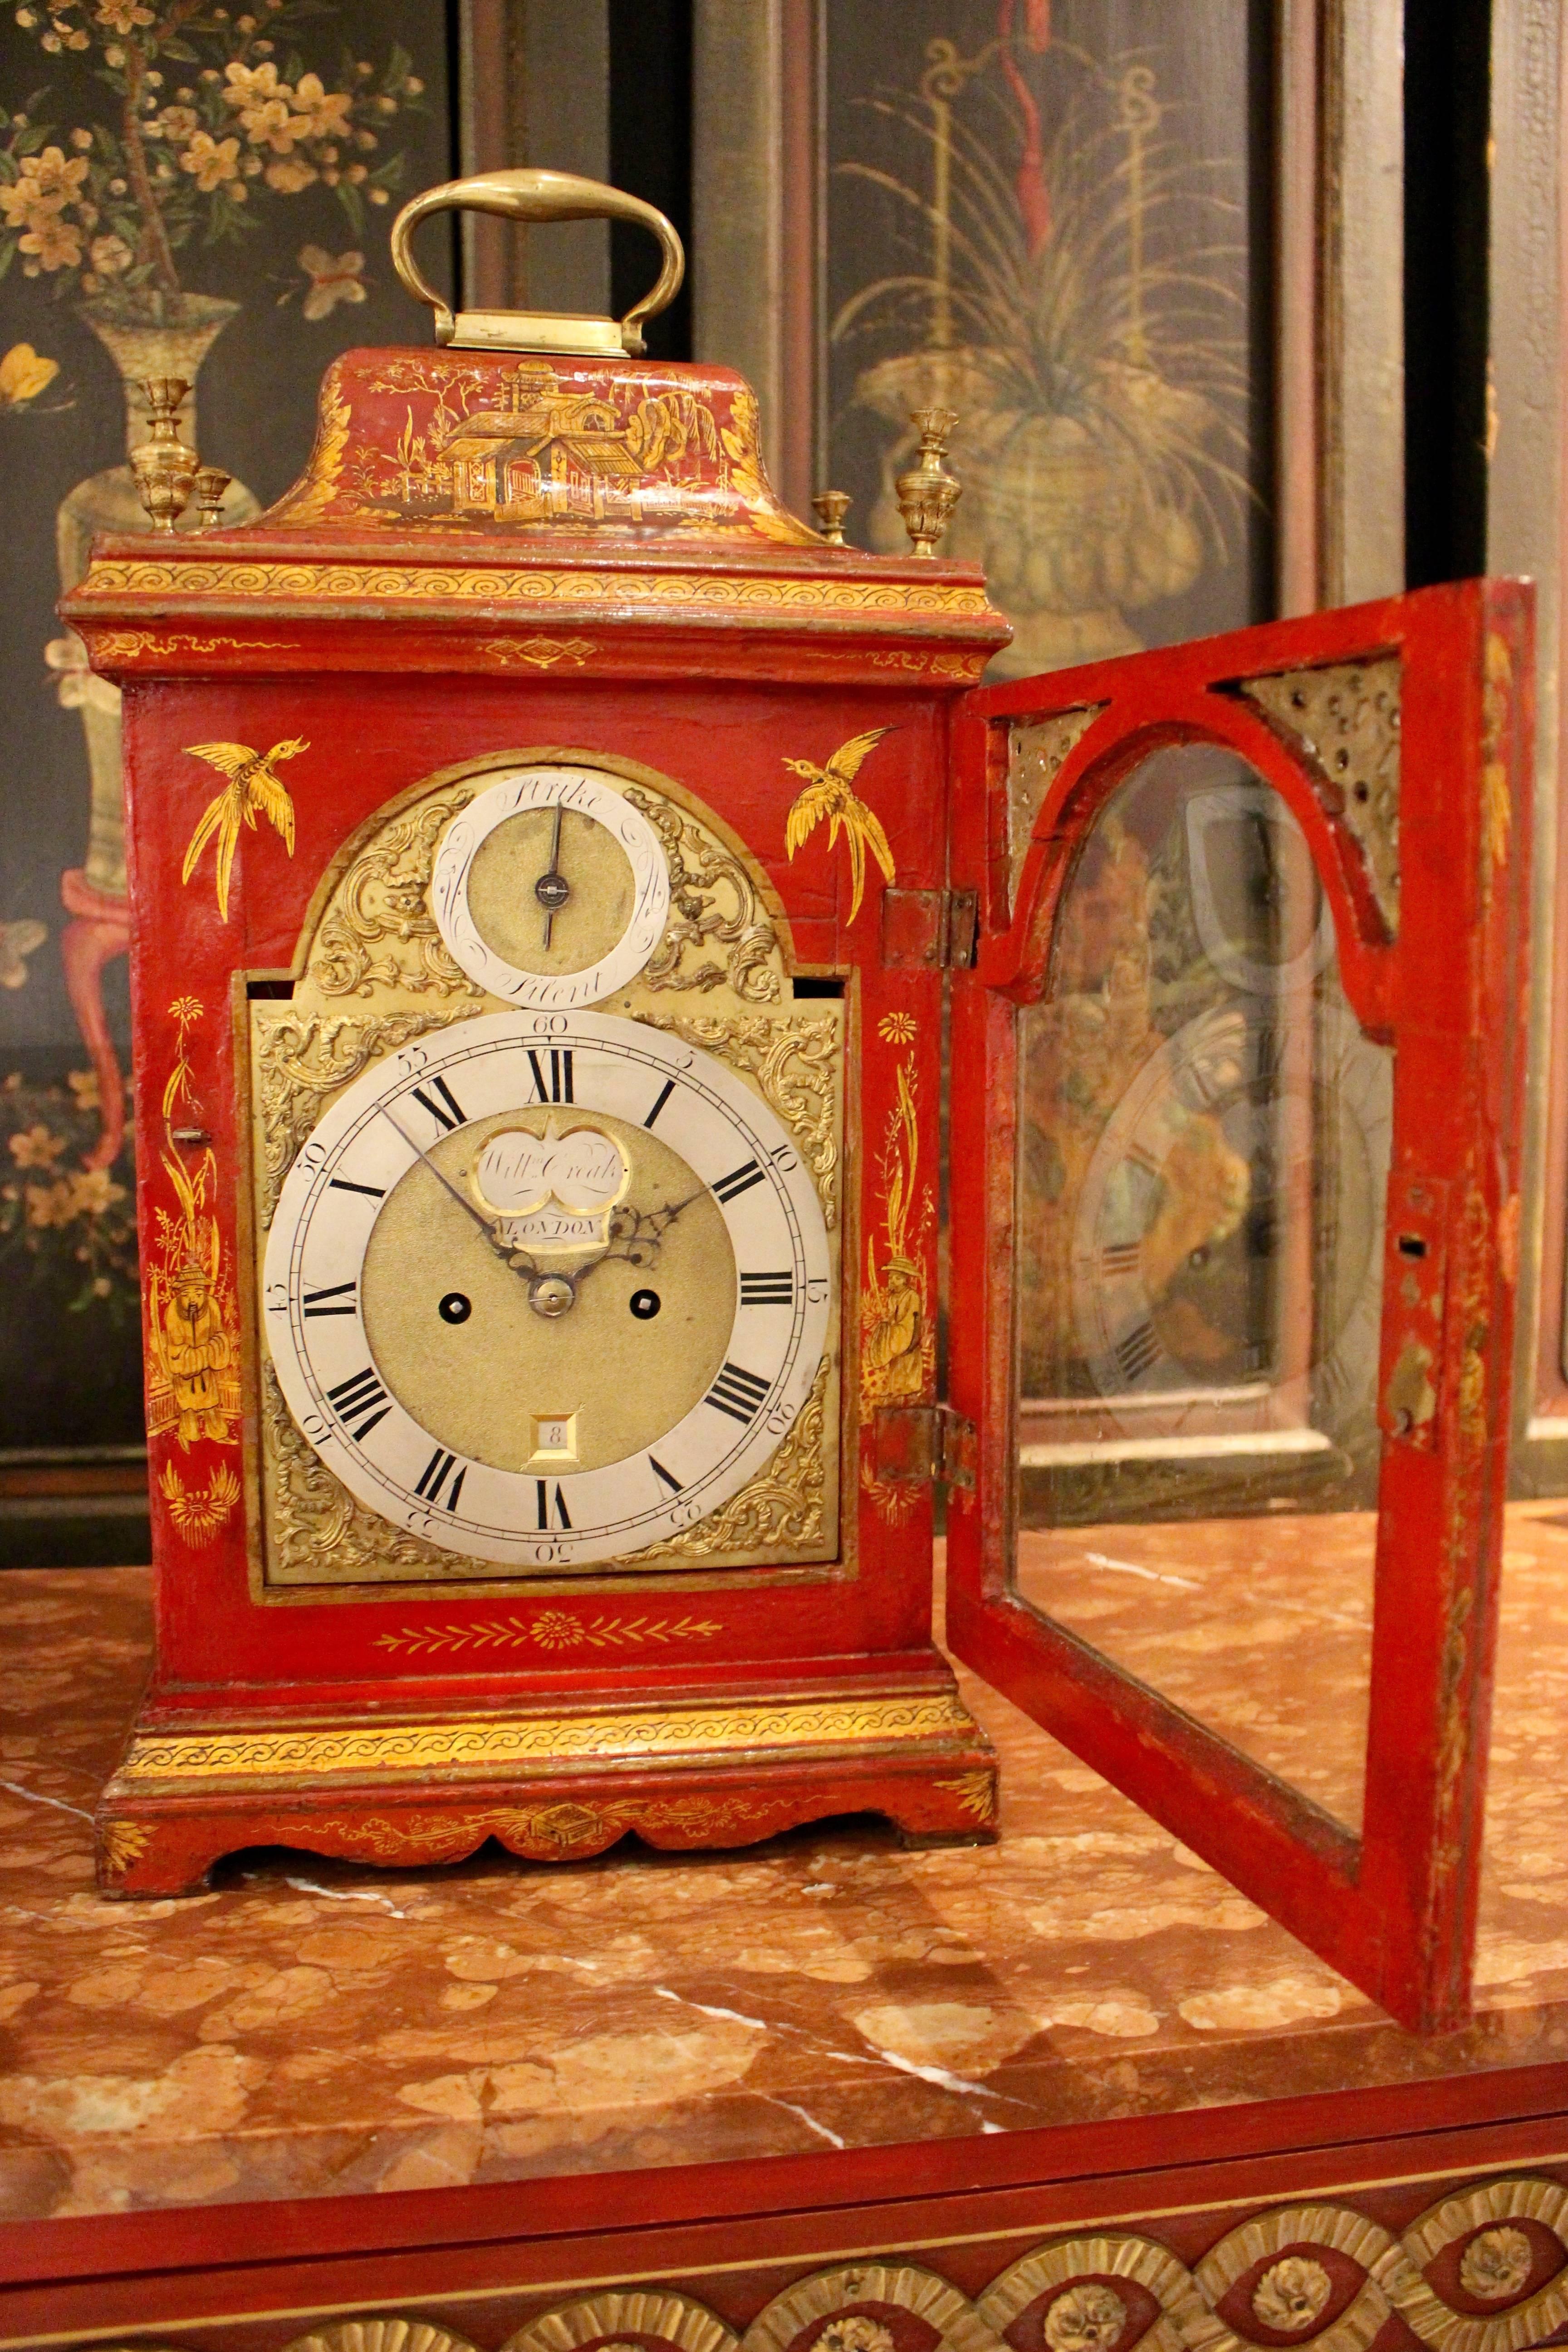 This English George II period 18th century table clock consists in a scarlet-japanned and parcel-gilt rectangular case with elaborate chinoiserie decoration and pierced frets to the sides. Resting on a molded base with a shaped apron and bracket